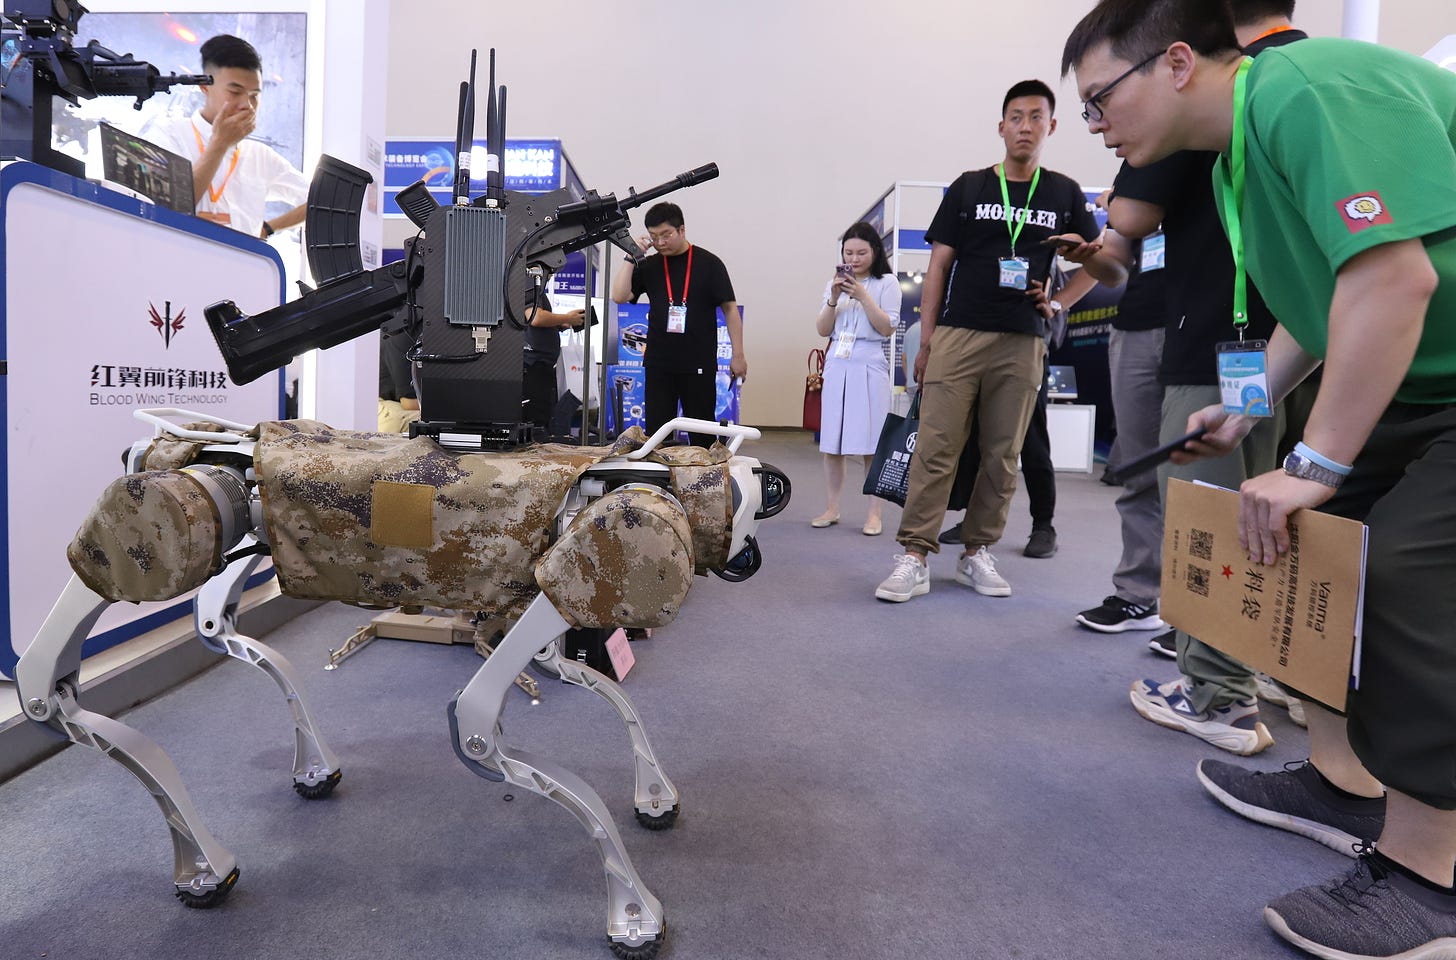 The robot dogs can be controlled by using a remote